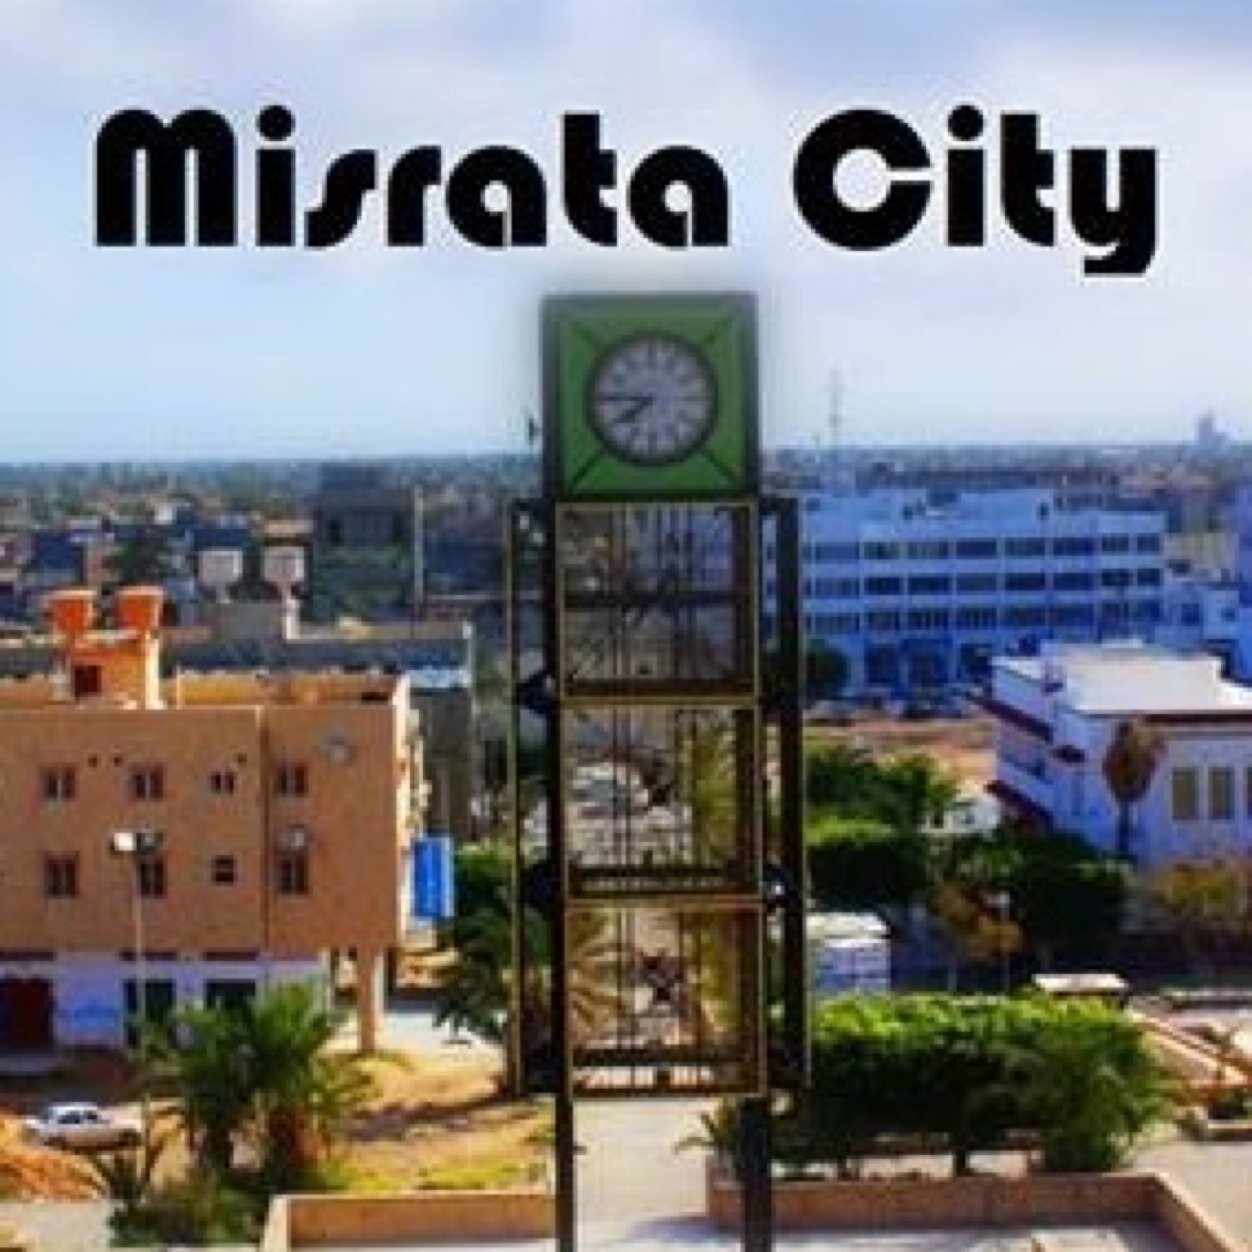 Official Misrata City Twitter. Keep up with @MisrataCity news, services, programs, free events and emergency notifications